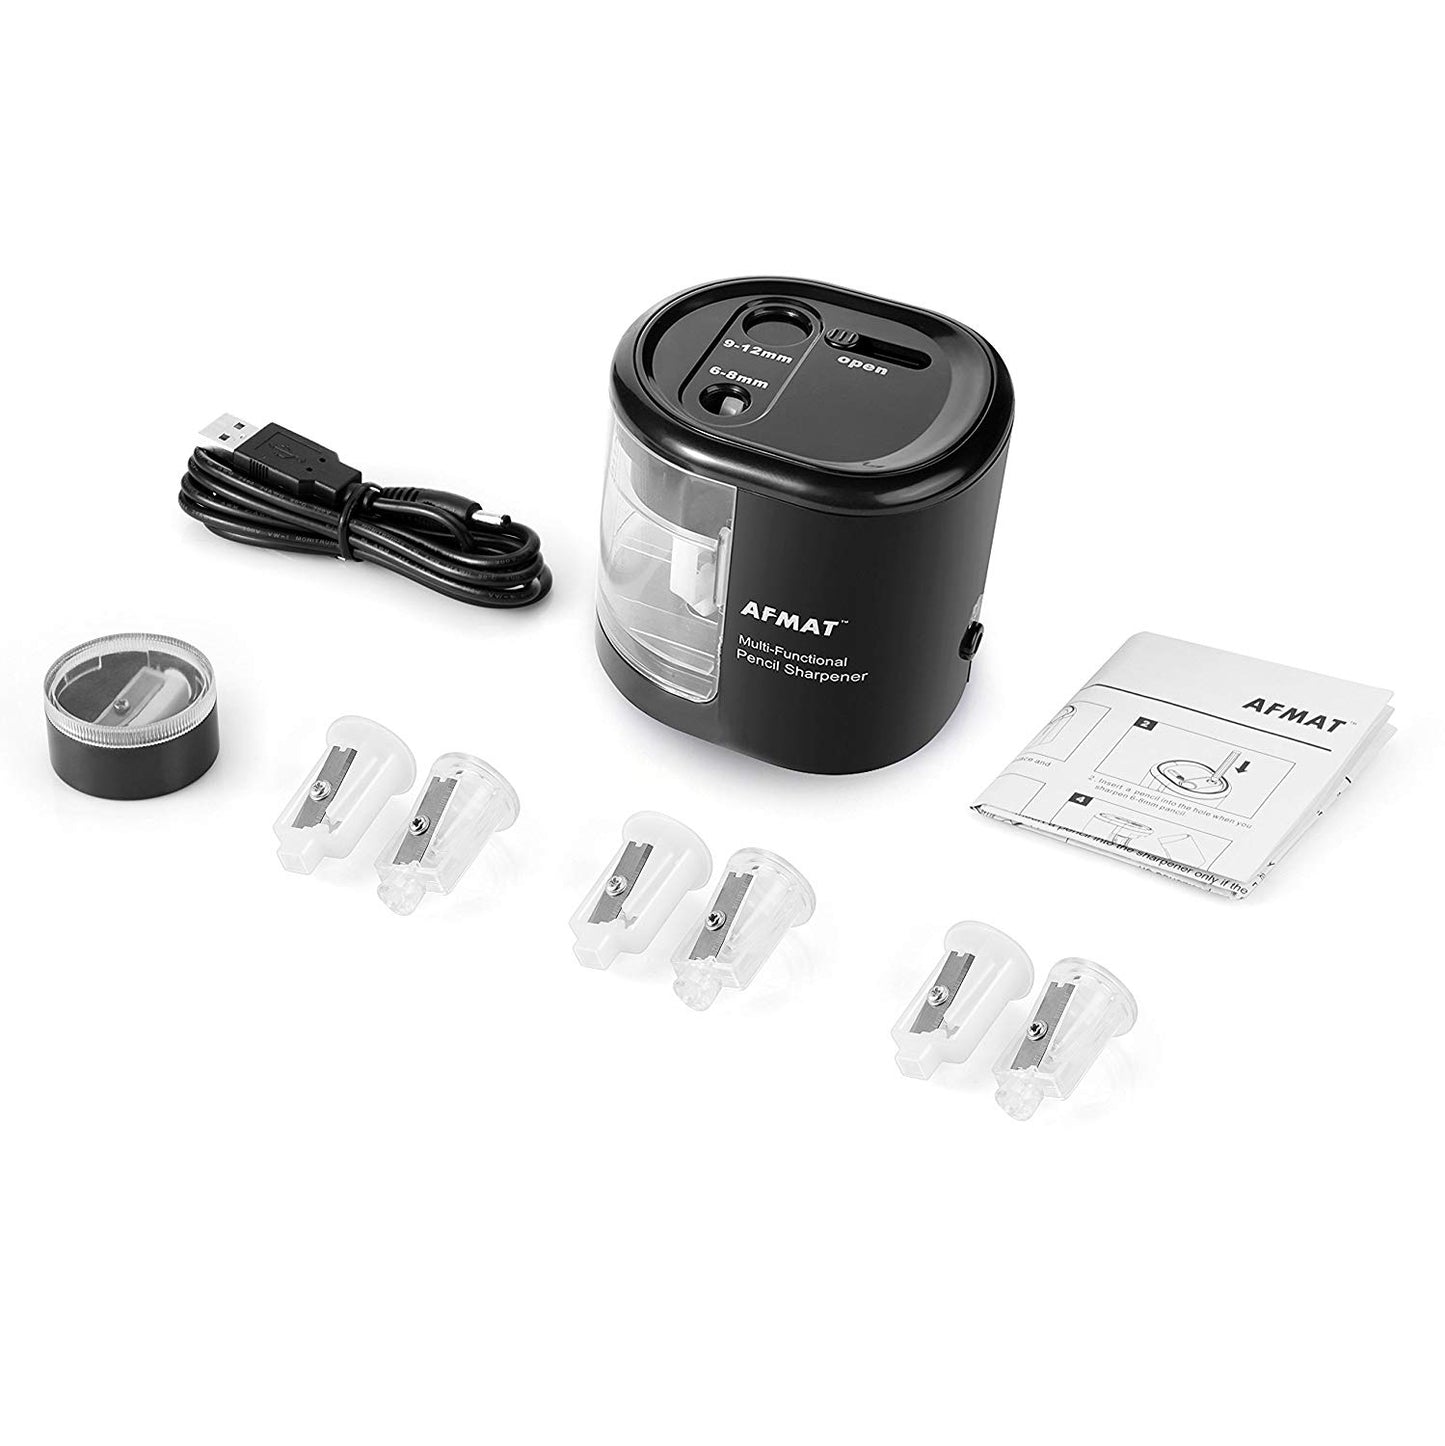 Electric Pencil Sharpener for Kids-PSB01